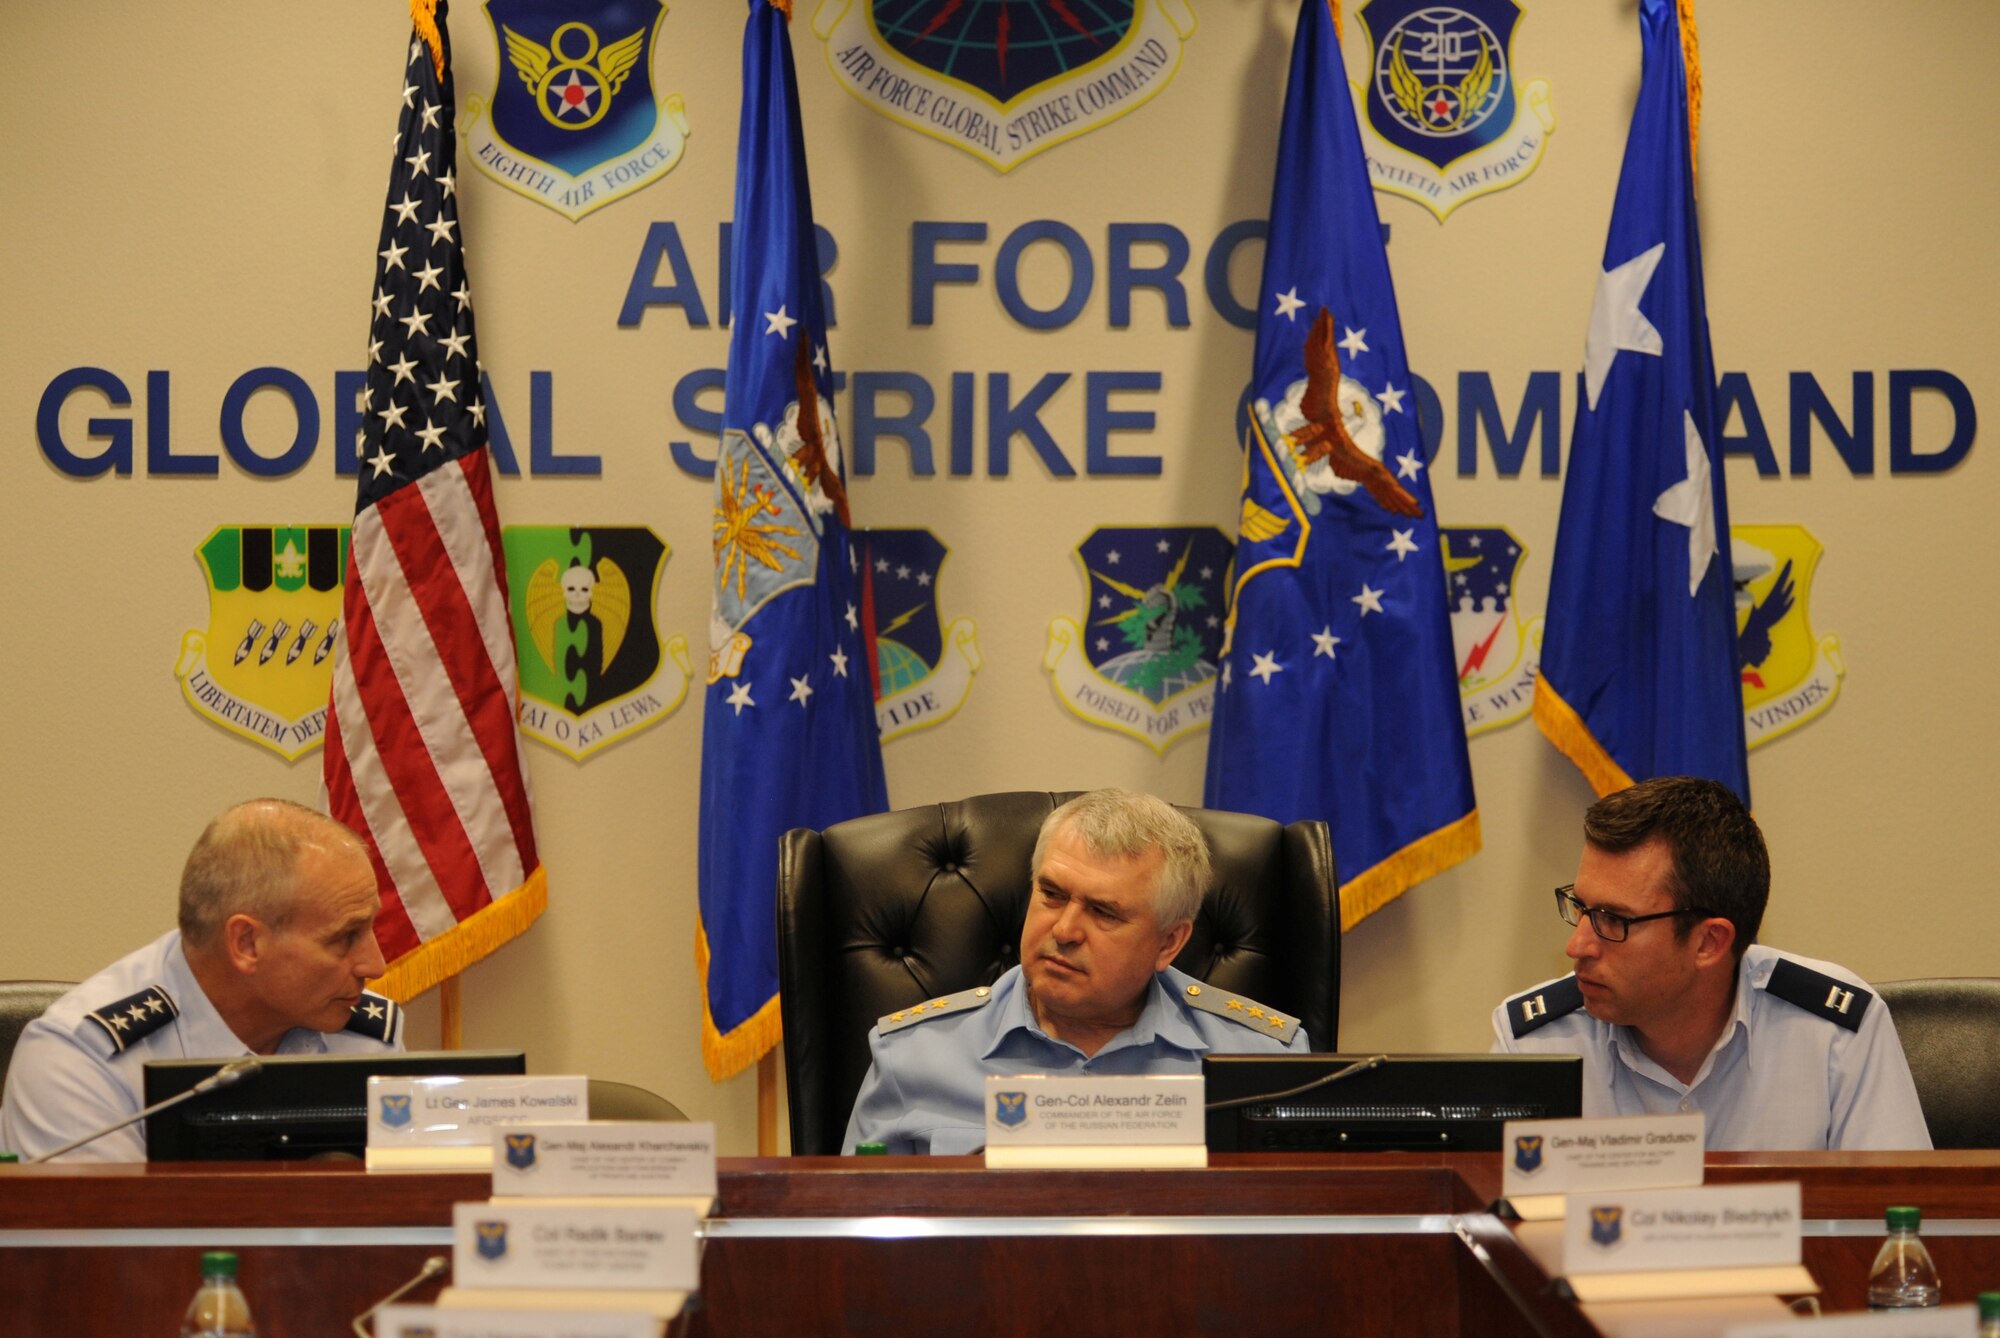 BARKSDALE AIR FORCE BASE, La - General-Colonel Alexander Nikolayevich Zelin,
Commander-in-Chief of the Russian Federation Air Force and Lt. Gen James
Kowalski, Air Force Global Strike Command commander, discuss training,
safety and areas of common interest after a Global Strike Command mission
briefing, as Capt. John Morash listens on, April 4.  The Russian Air Chief
visited the command, April 4, as part of the Chief of Staff of the Air
Force's counterpart visit program.  (U.S. Air Force photo/Master Sgt. Corey
A. Clements)